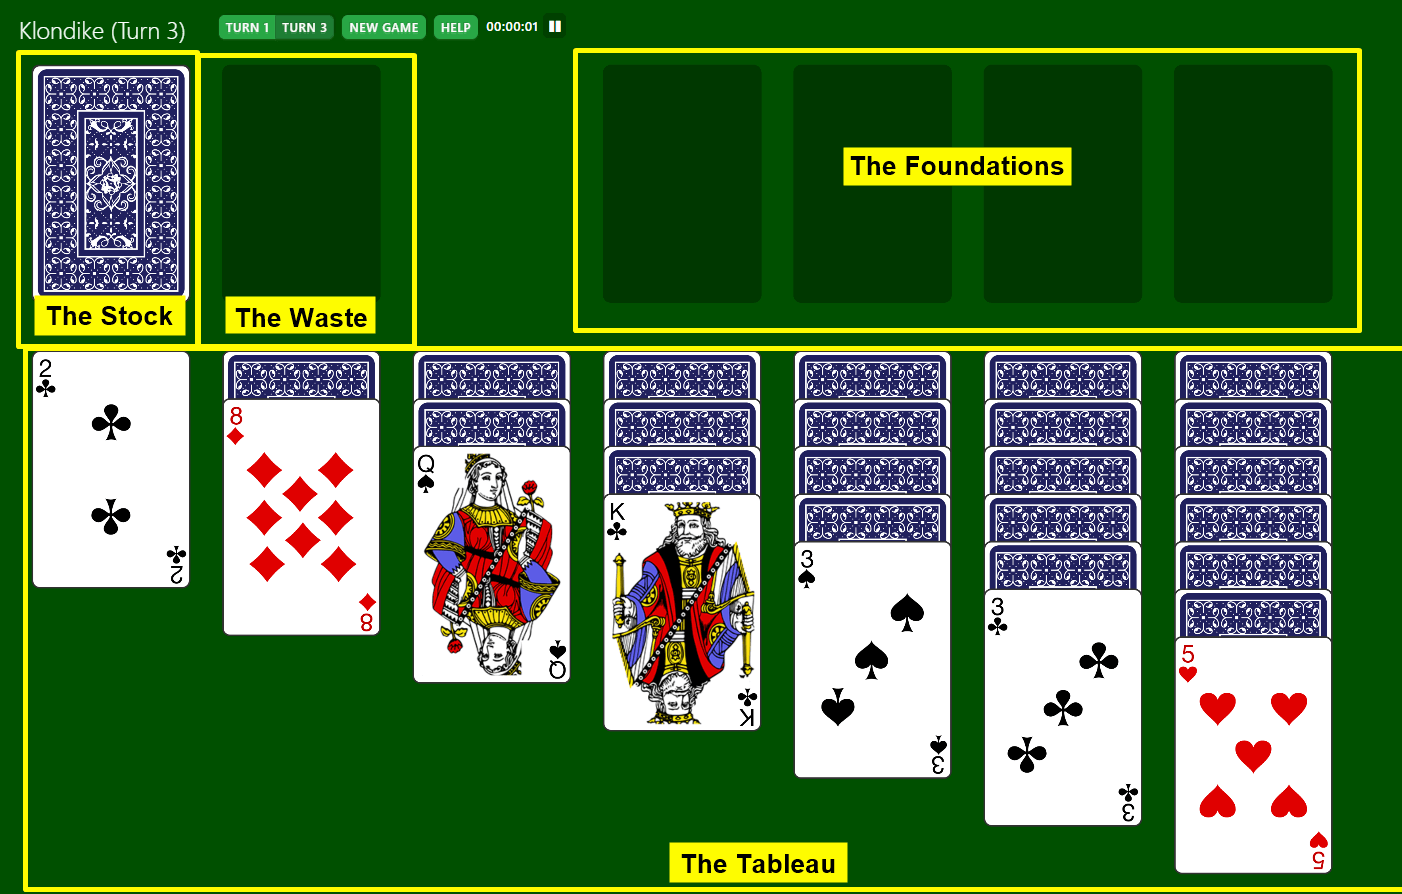 klondike solitaire card game